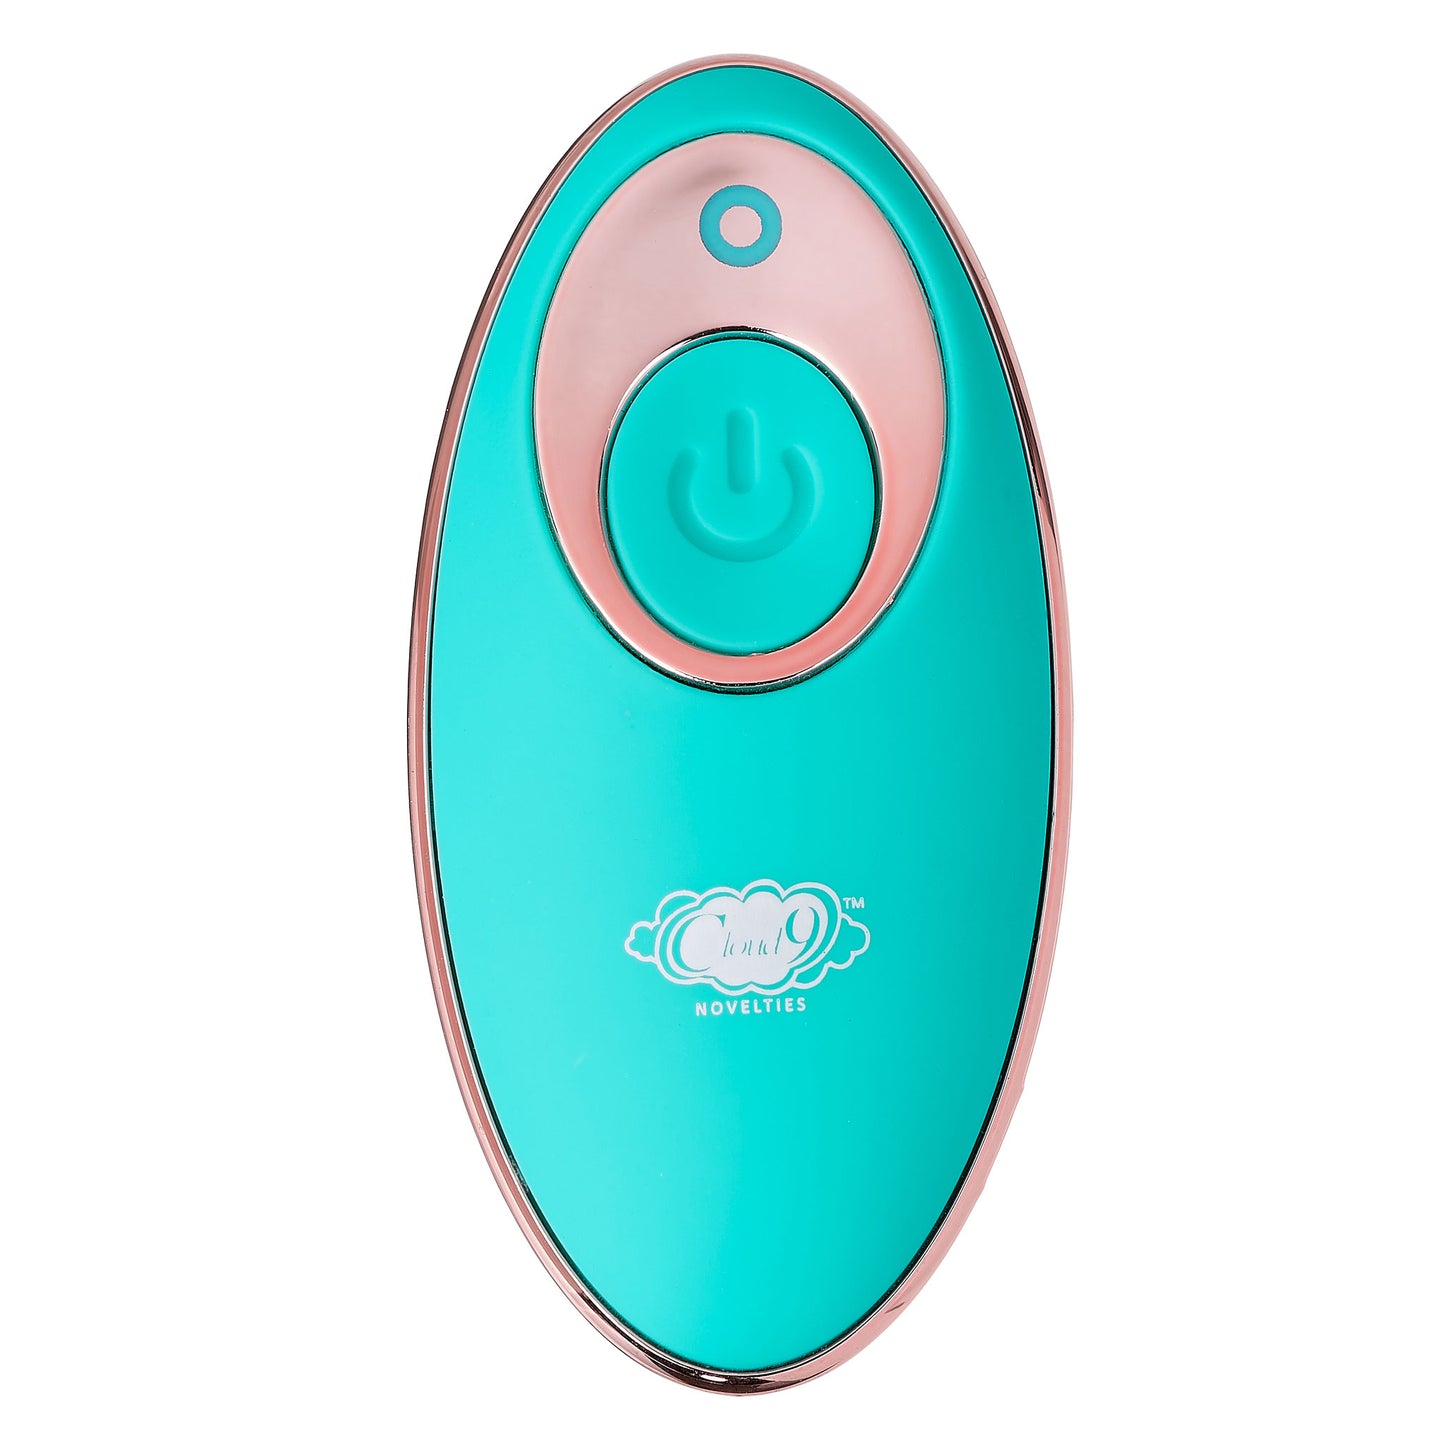 Health and Wellness Wireless Remote Control Egg - Swirling Motion